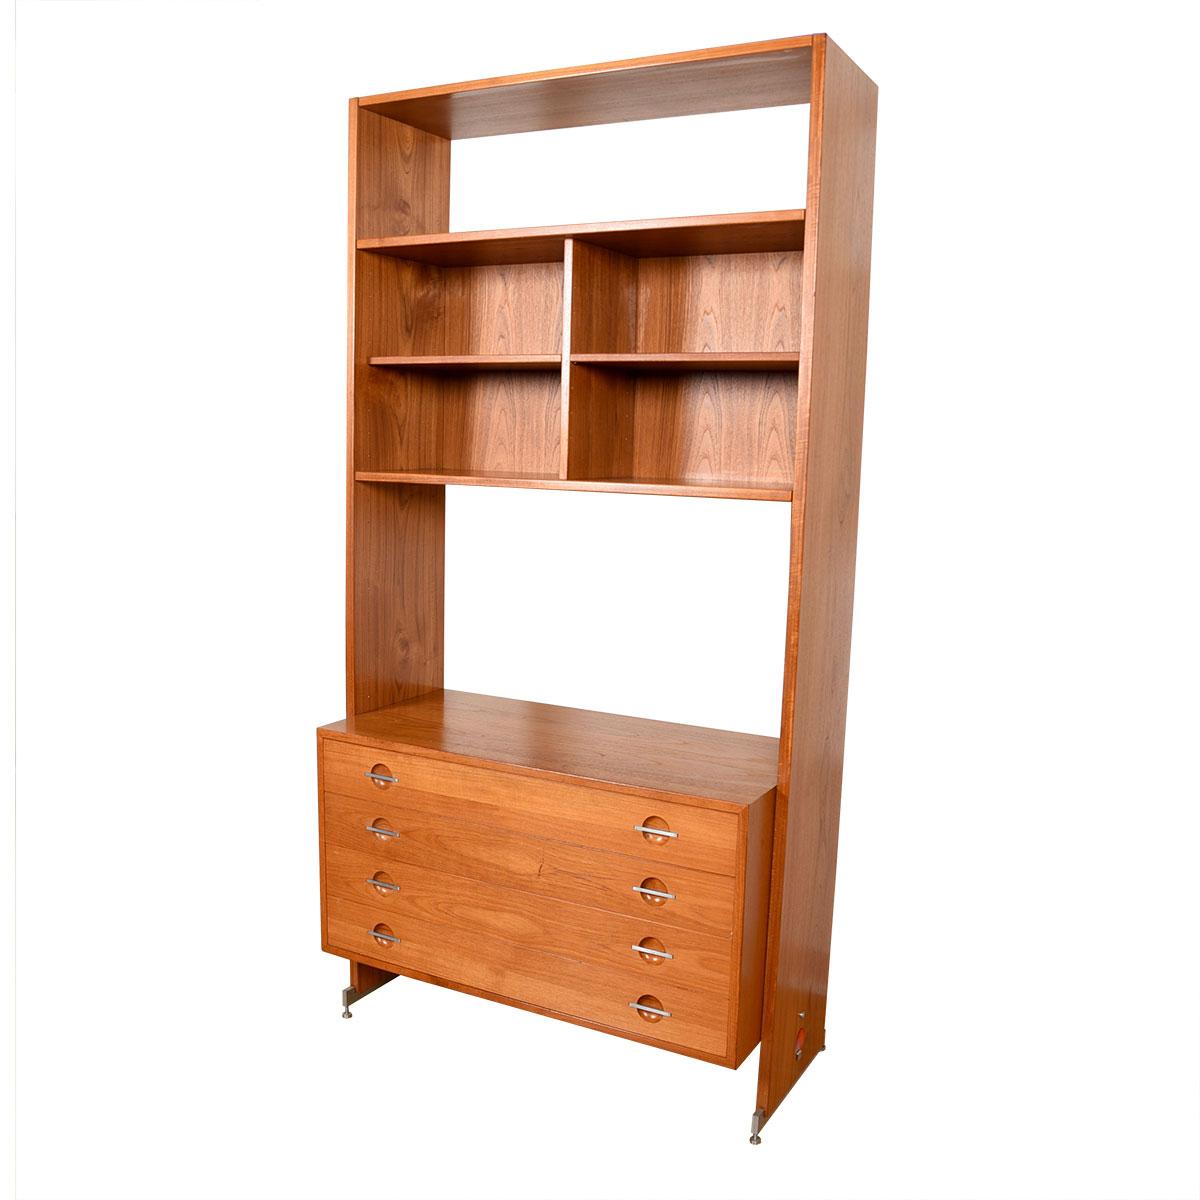 Hans Wegner Danish Teak Single Column Wall Unit / Room Divider with Display Case

Additional information:
Material: Teak
Featured at DC
Use alone or add to your wall system with this single column unit in teak designed by Hans Wegner. Piece is